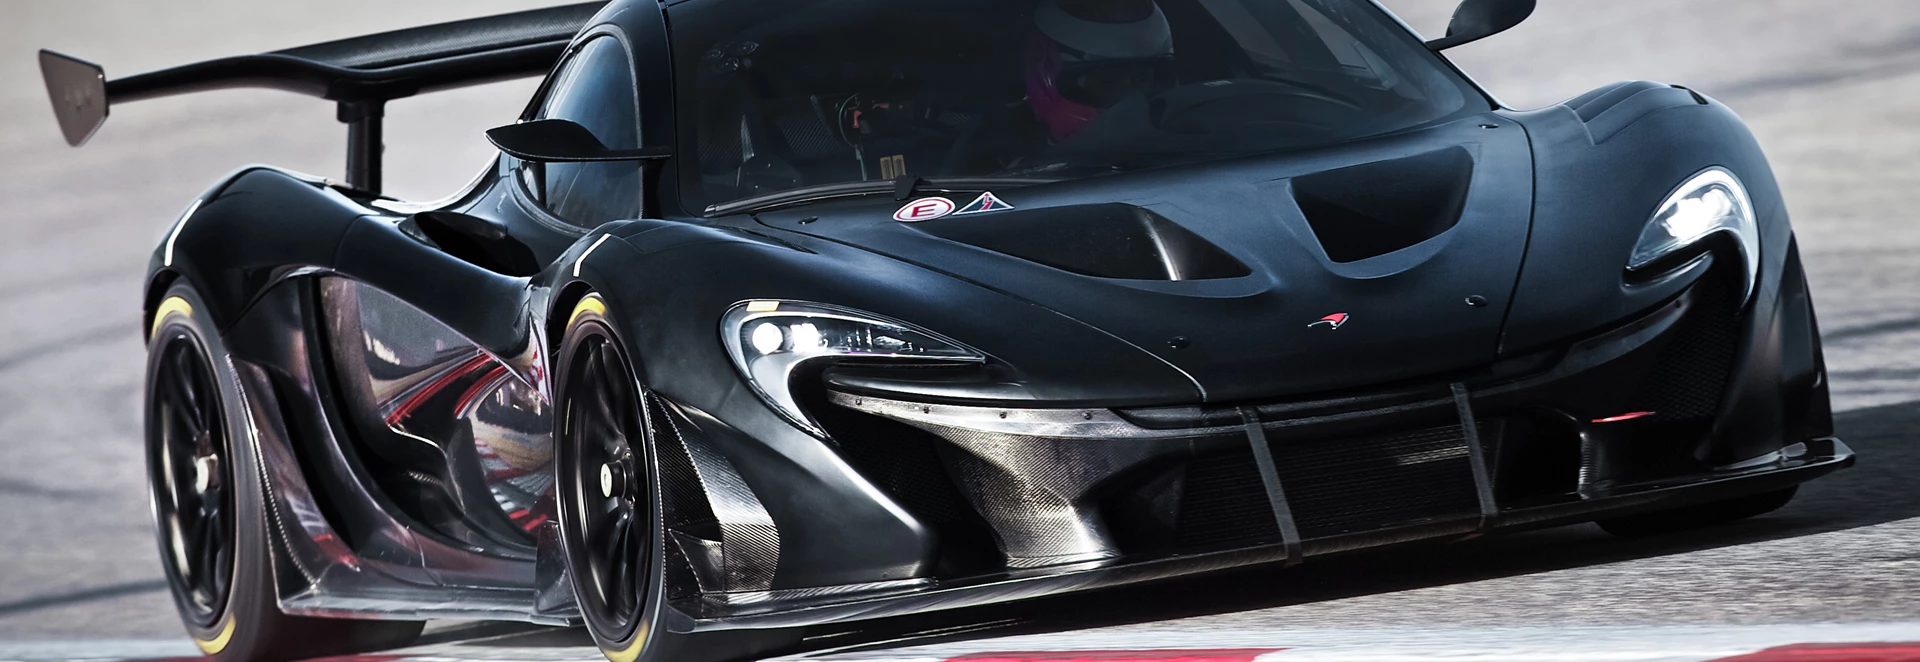 McLaren rumoured to unveil the P15 in early 2018 